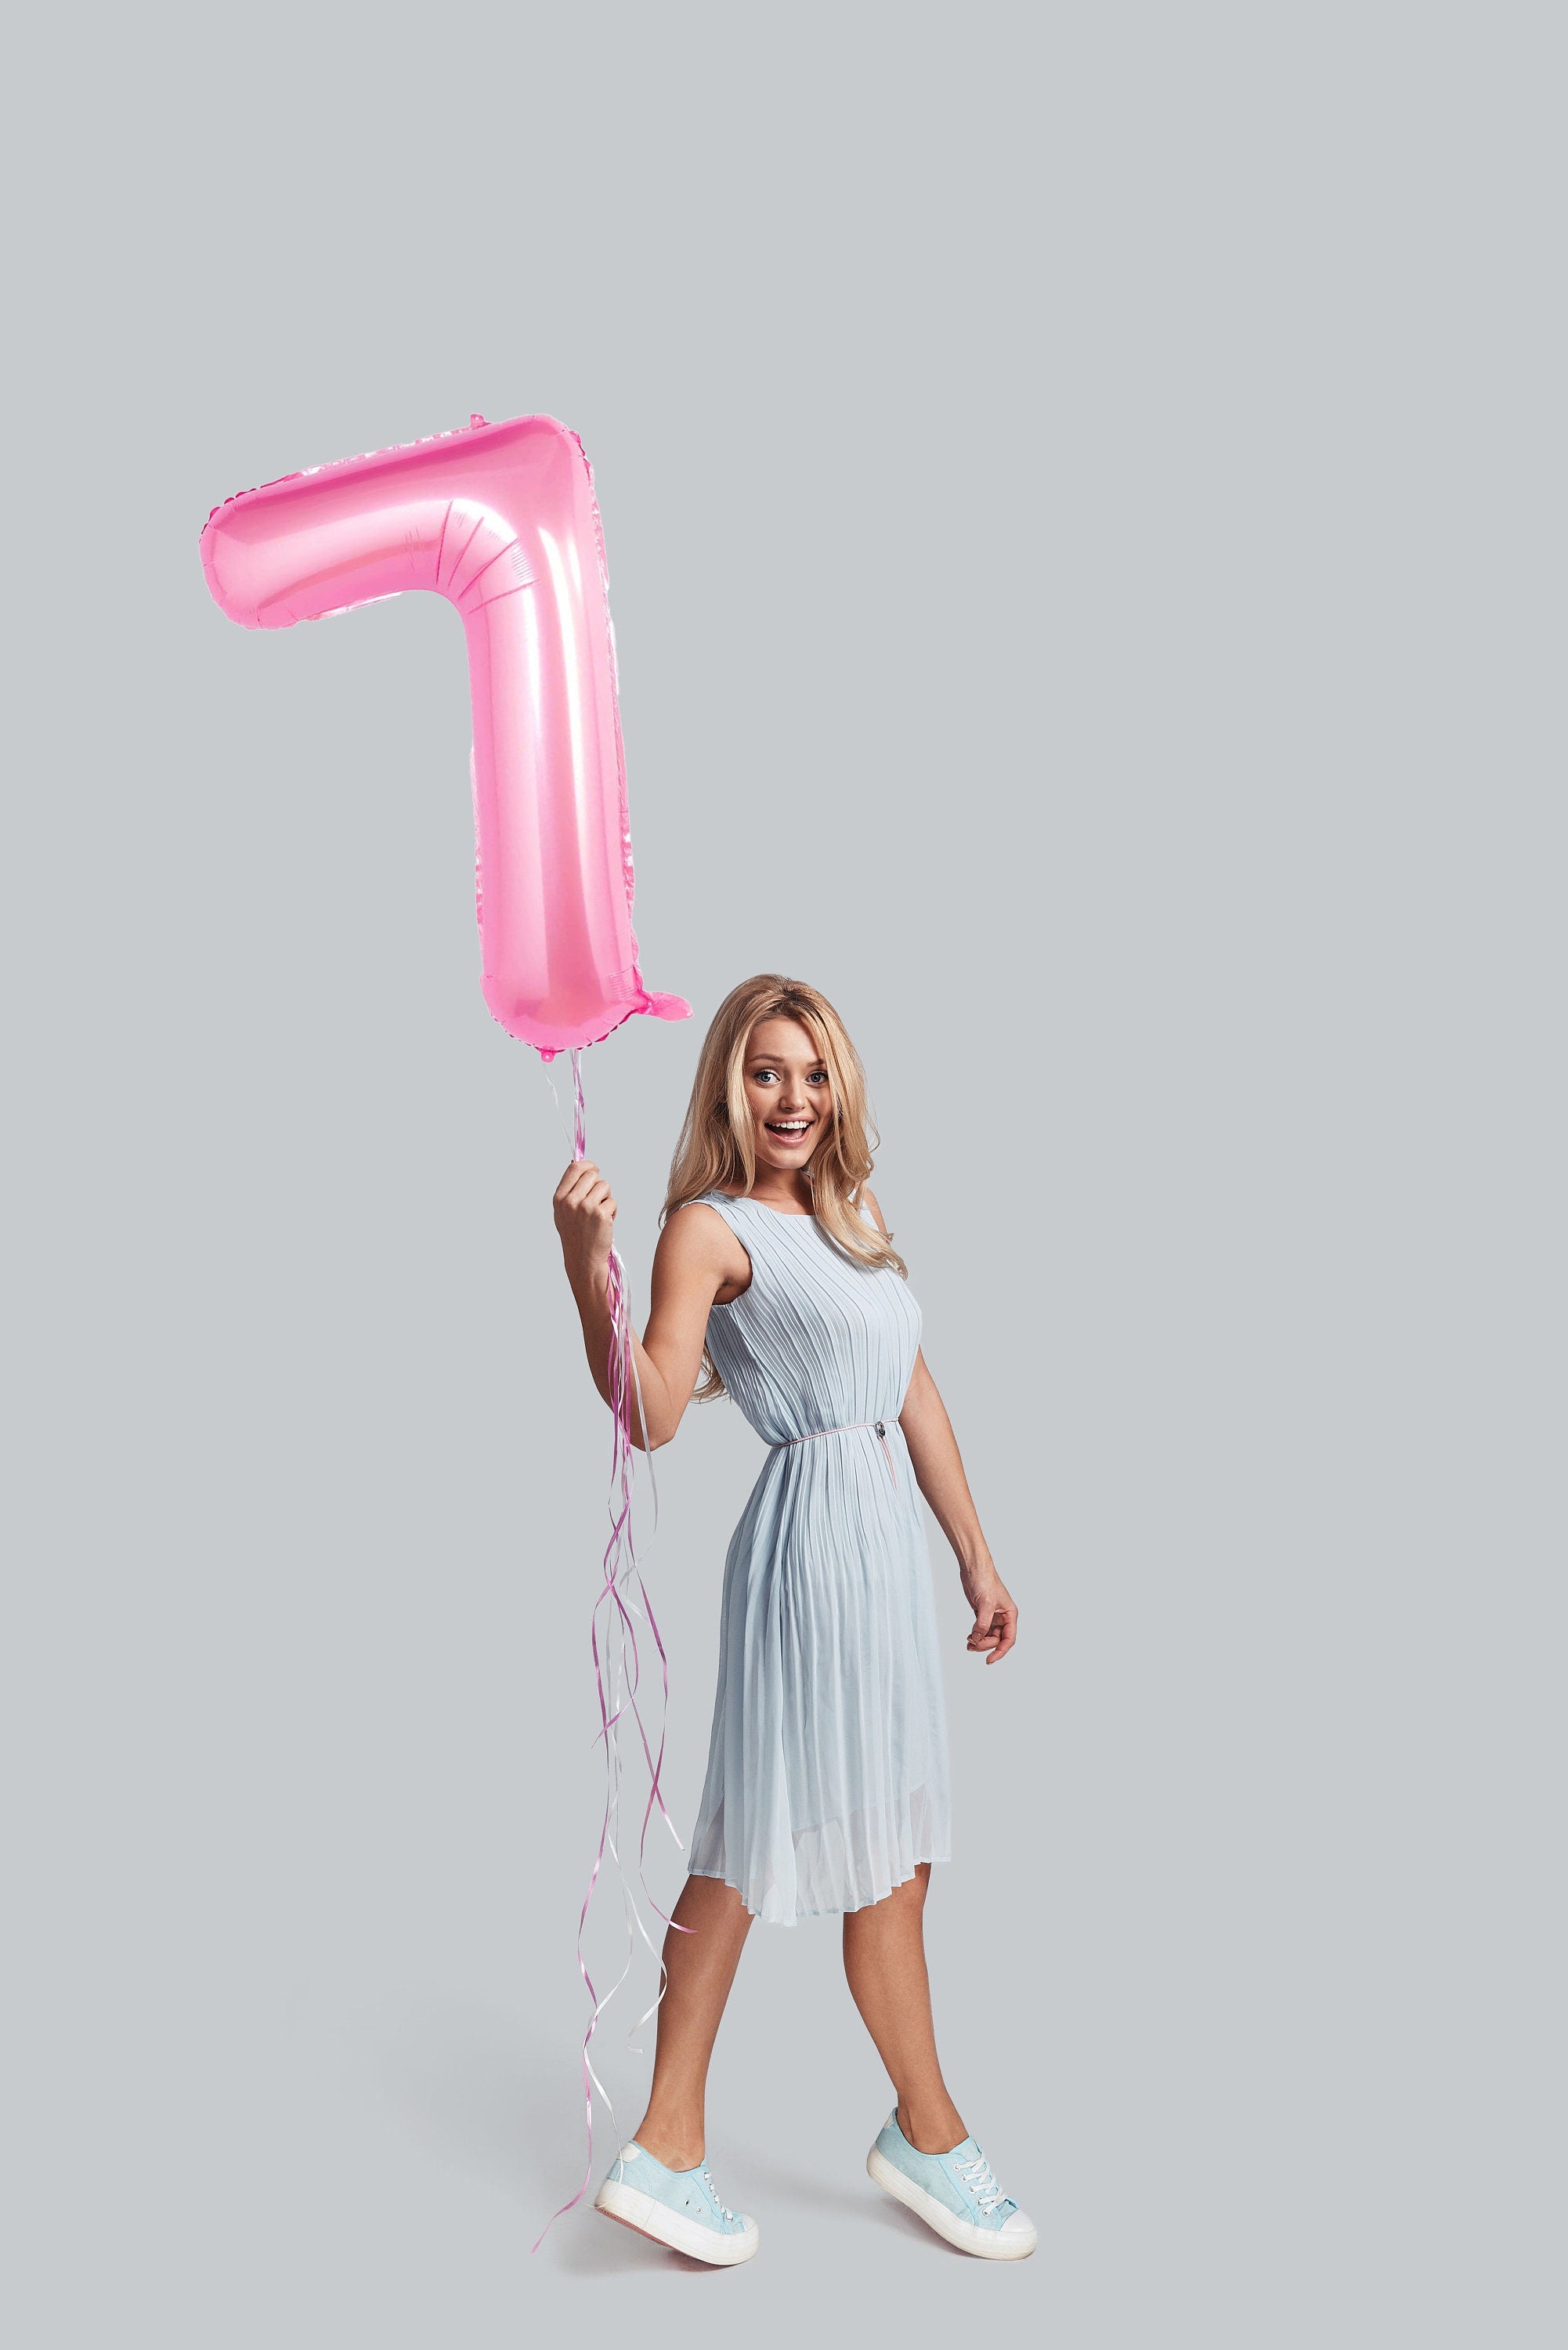 32 Inch Foil Pink Number Seven Shaped Balloon - Perfect for Magnificent Seven-Year Celebrations!